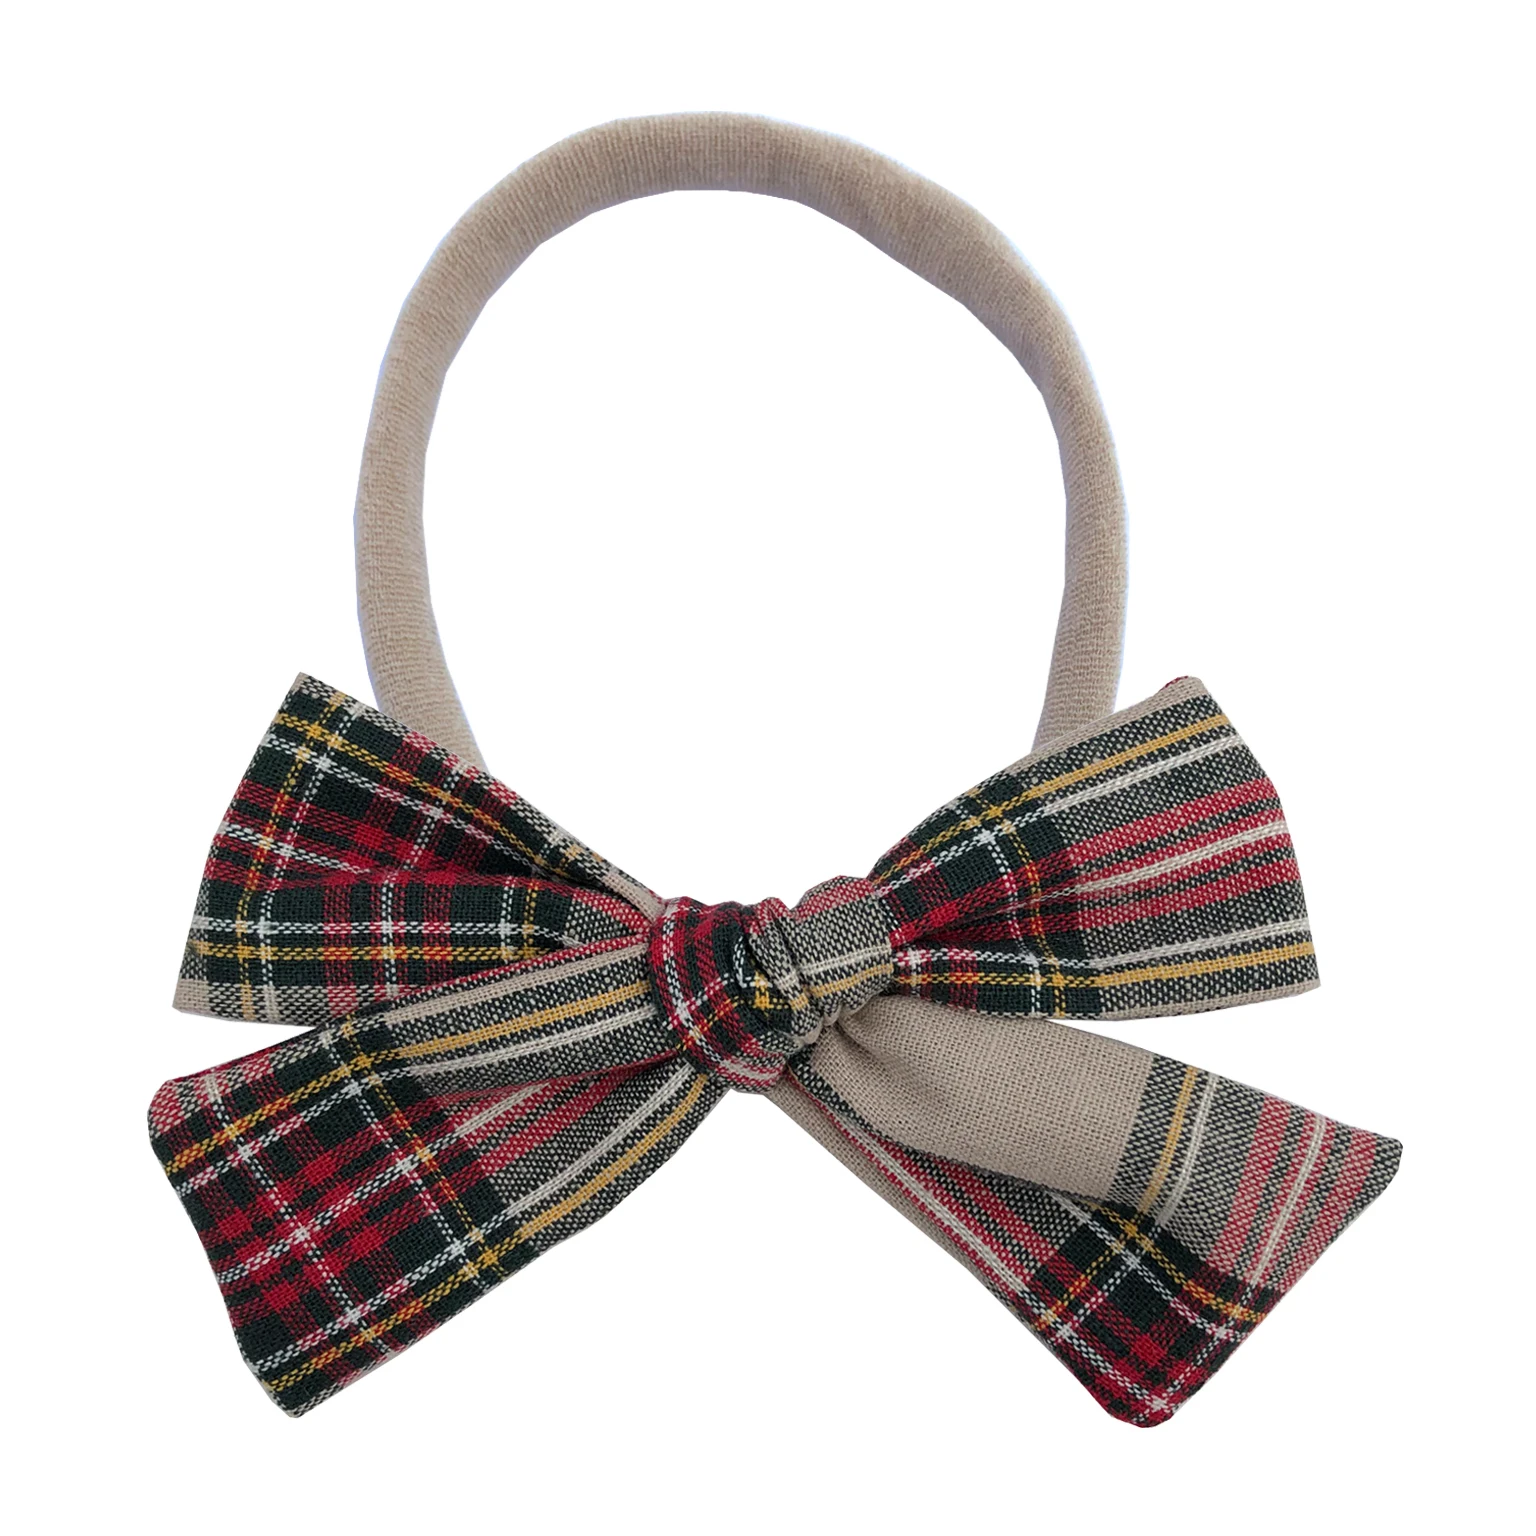 Vintage Plaid Cotton 3 inch Fabric Bow Nylon Headbands Kids Toddler Baby Girls Elastic Hair Bands Bow Headwear Accessories